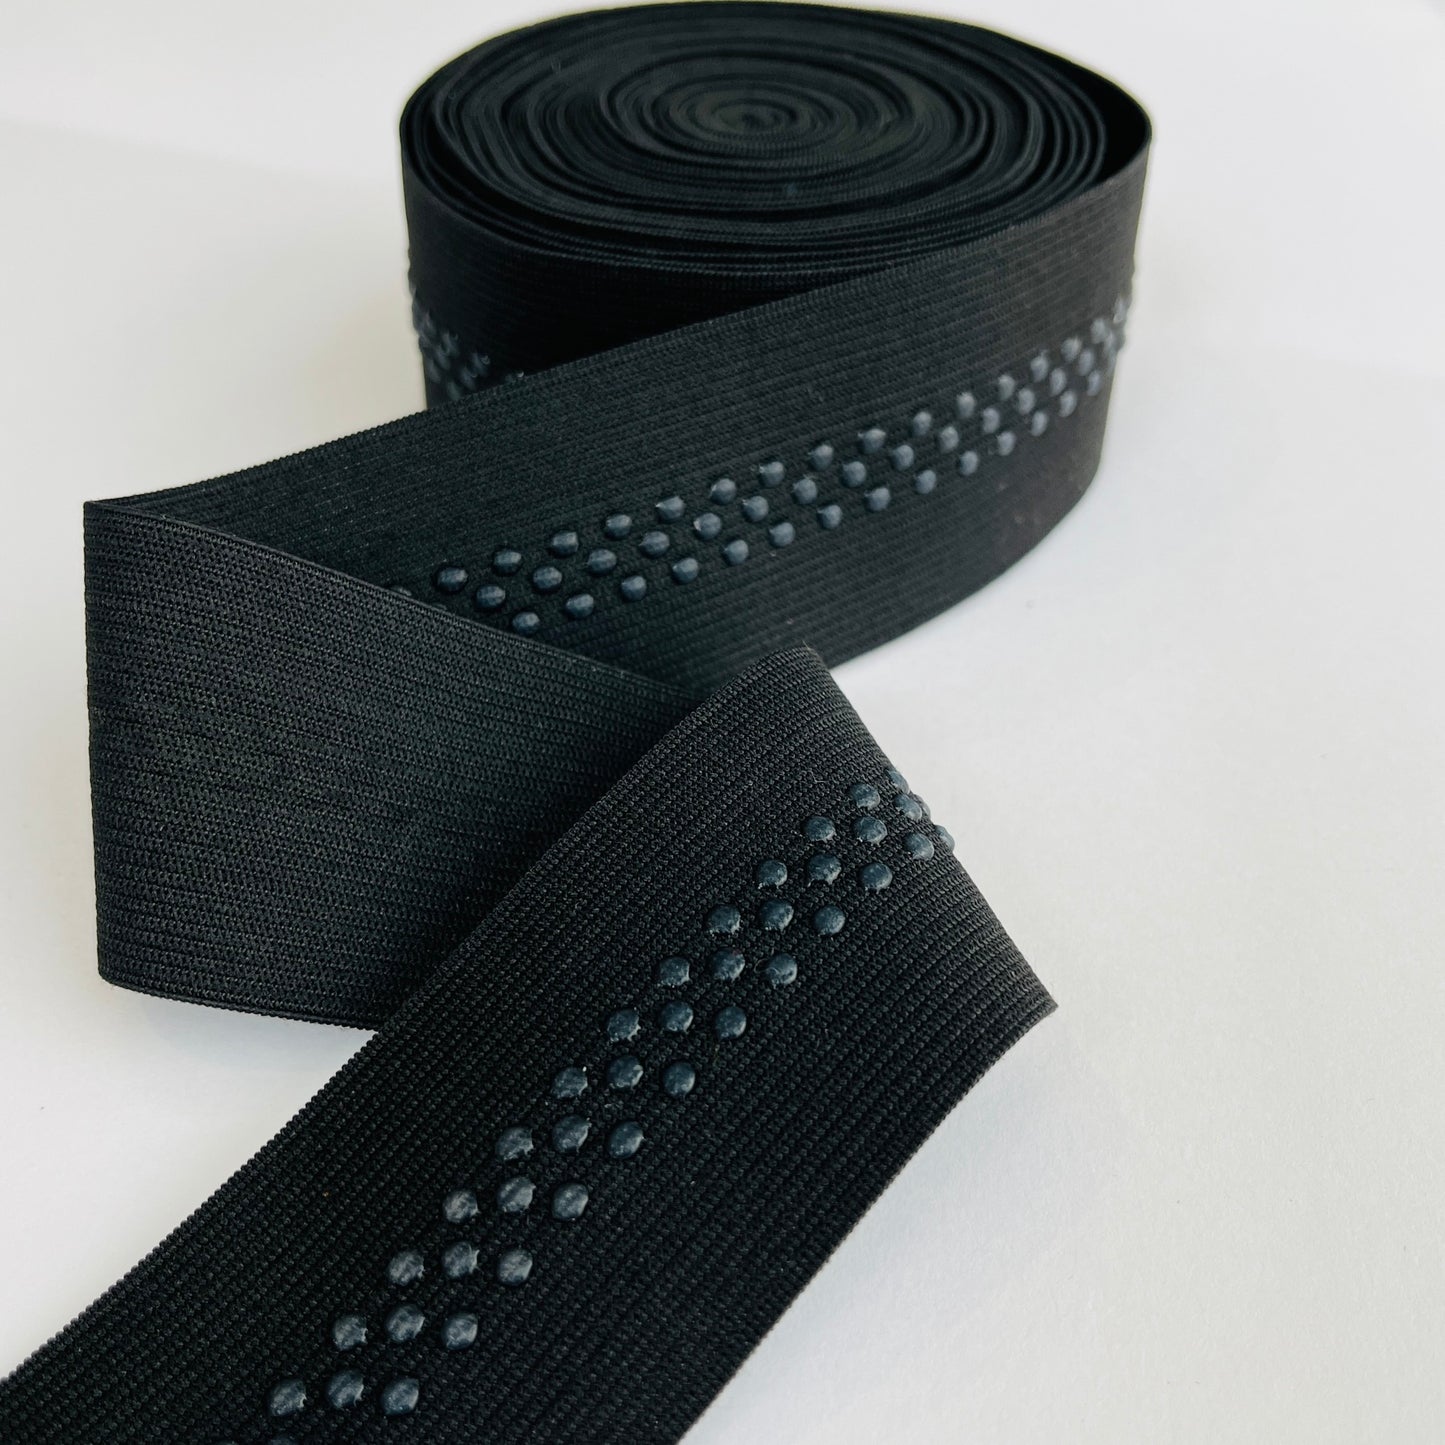 48mm, 2” wide silicone backed gripper elastic for headbands, waists, bra straps and lingerie 48mm wide with the drop silicone beads running at a 10mm width dead centre Soft gripper elastic with a 10mm wide band of non-slip silicone beads running centrally to help prevent movement when worn. Perfect for headbands, waistbands, activewear and lingerie. 